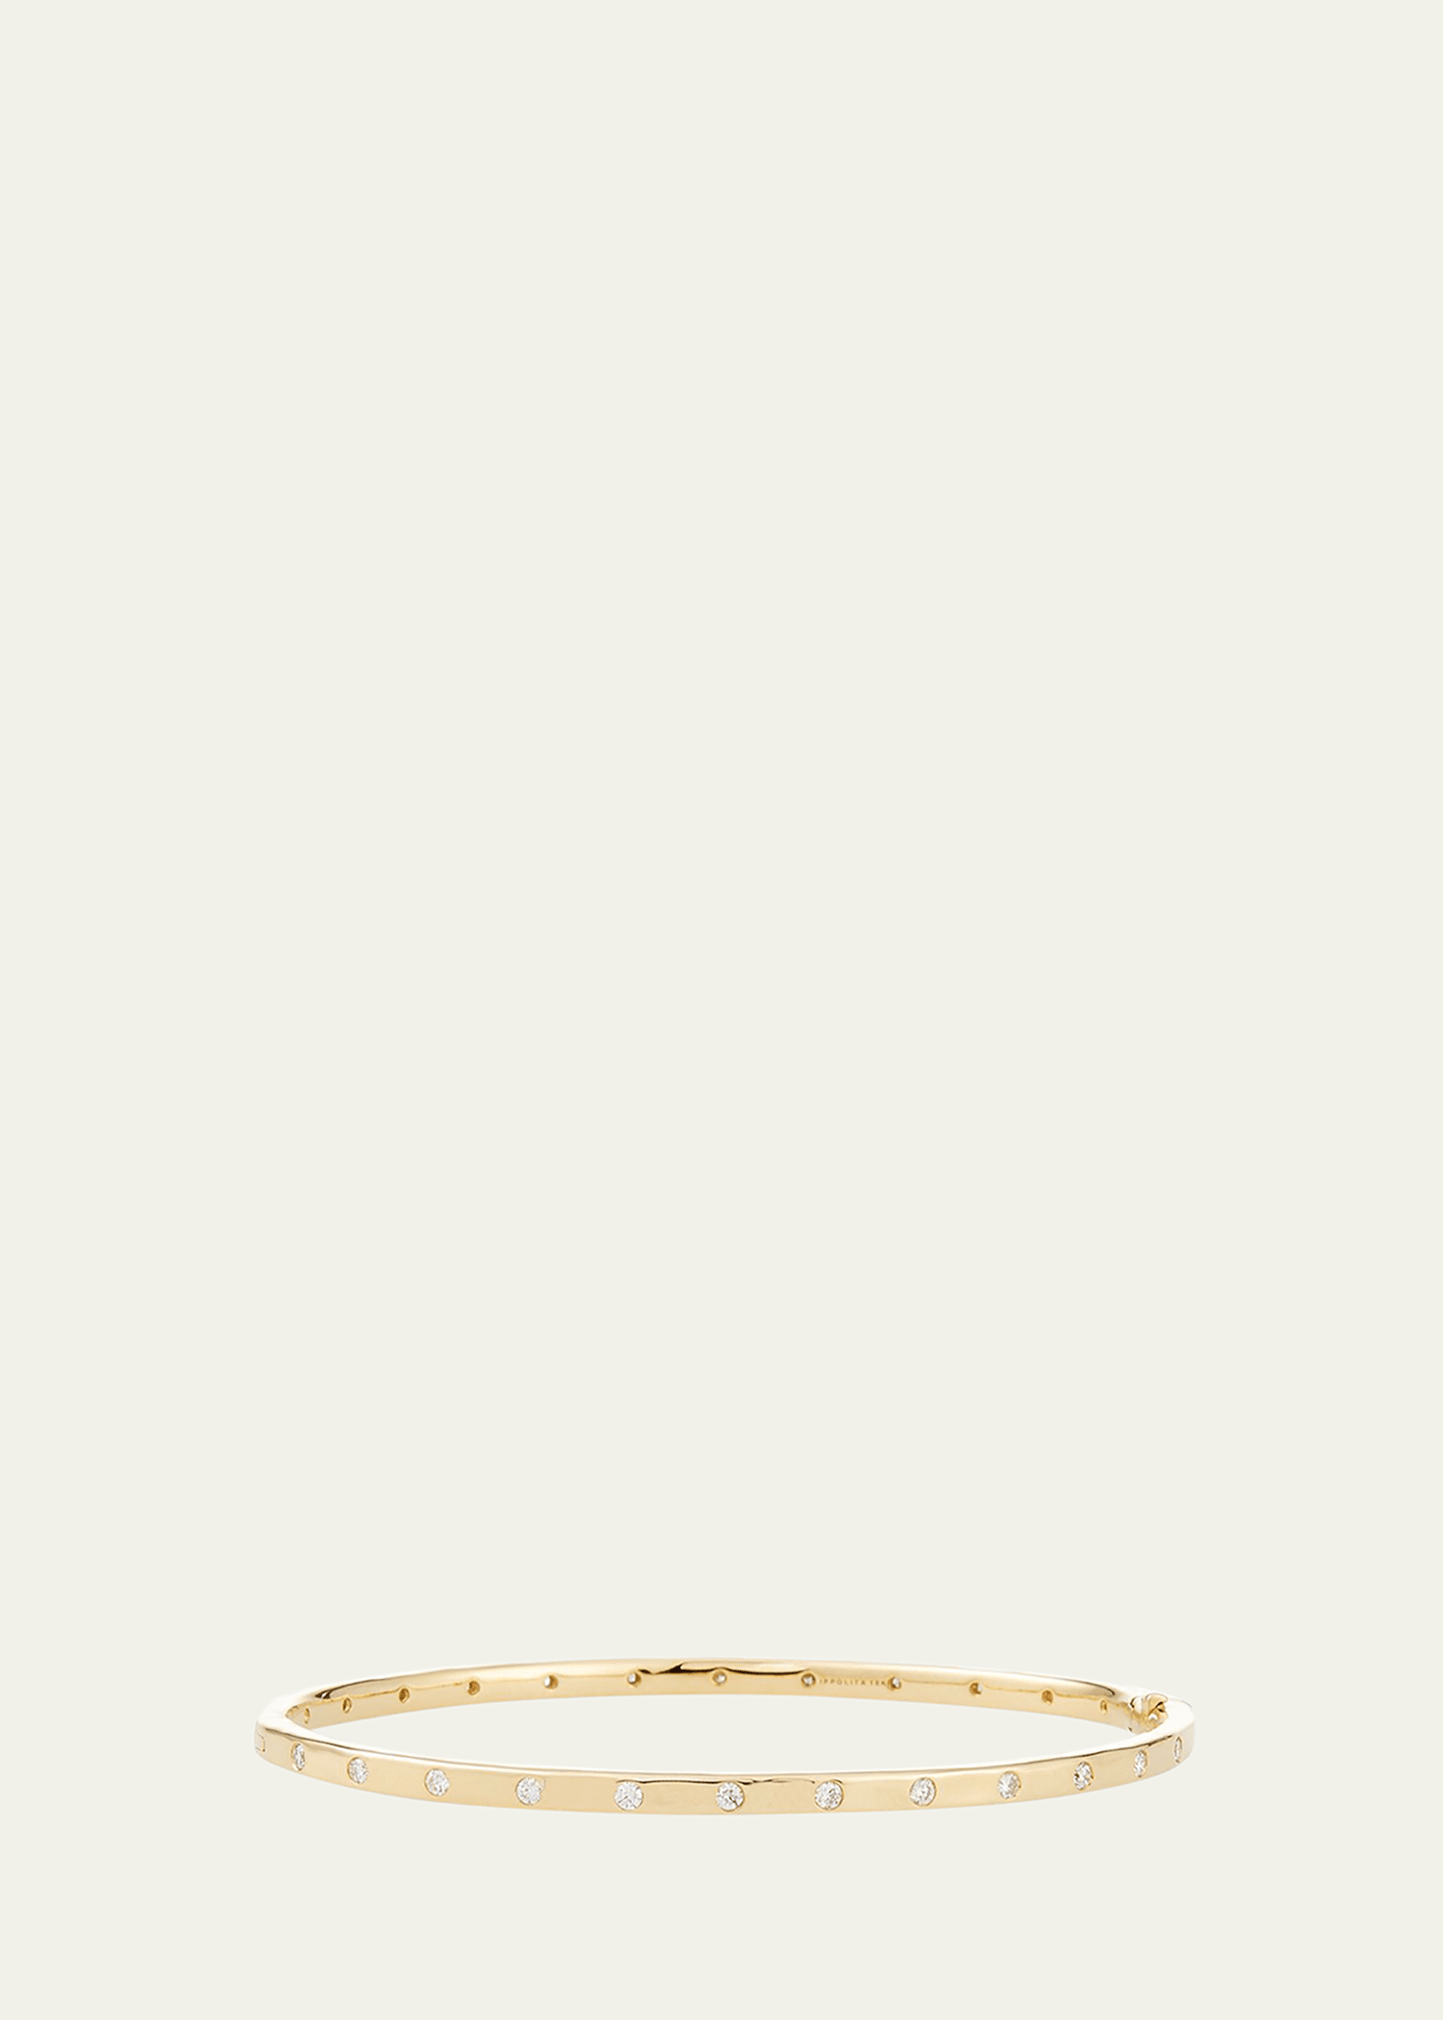 28-Stone Hinged Bangle in 18K Gold with Diamonds